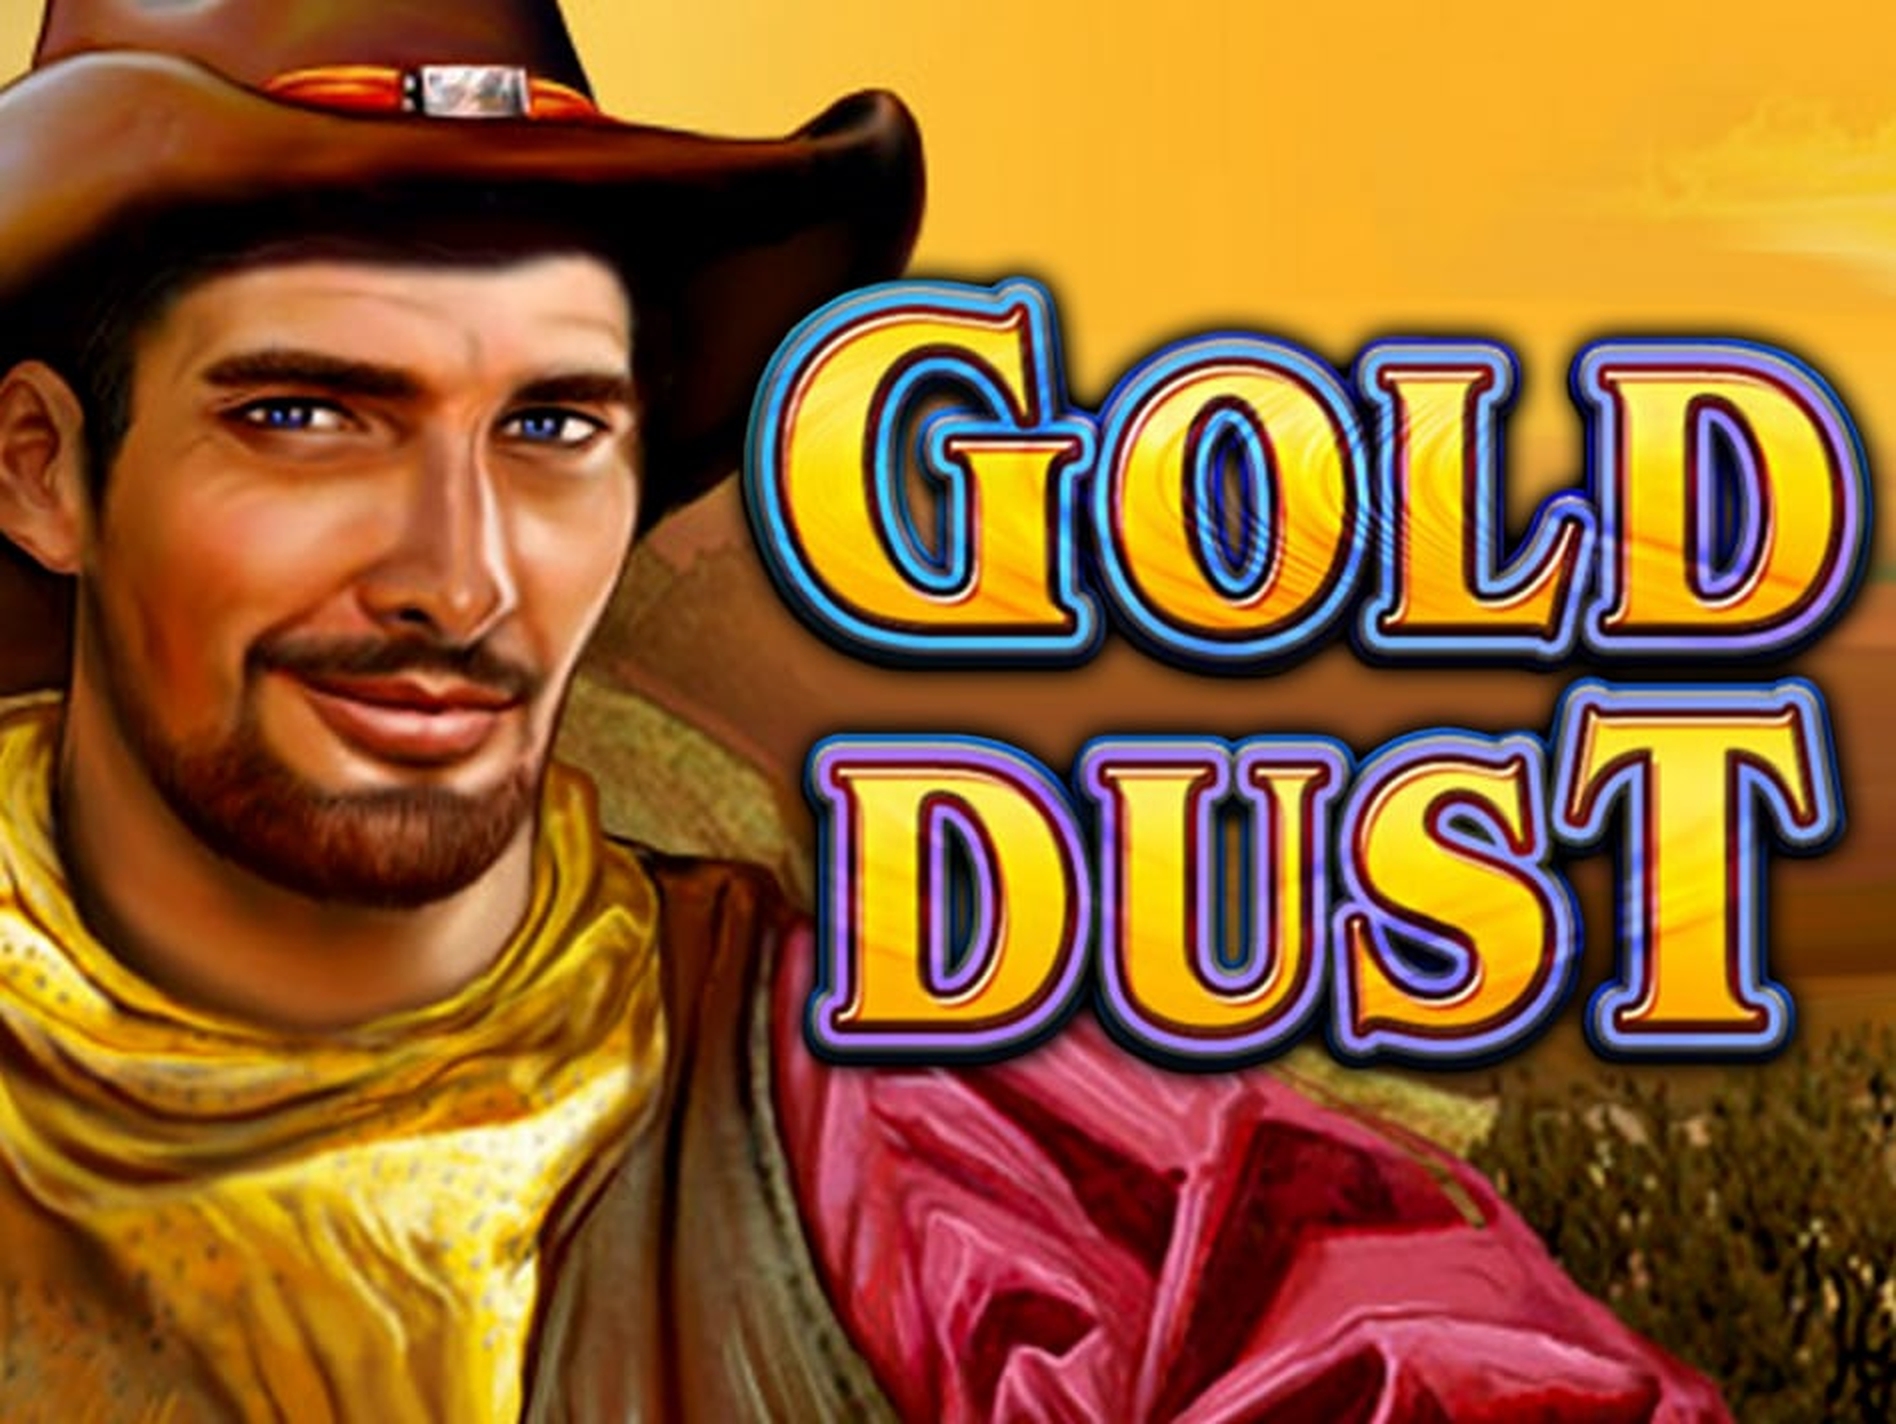 Gold Dust demo